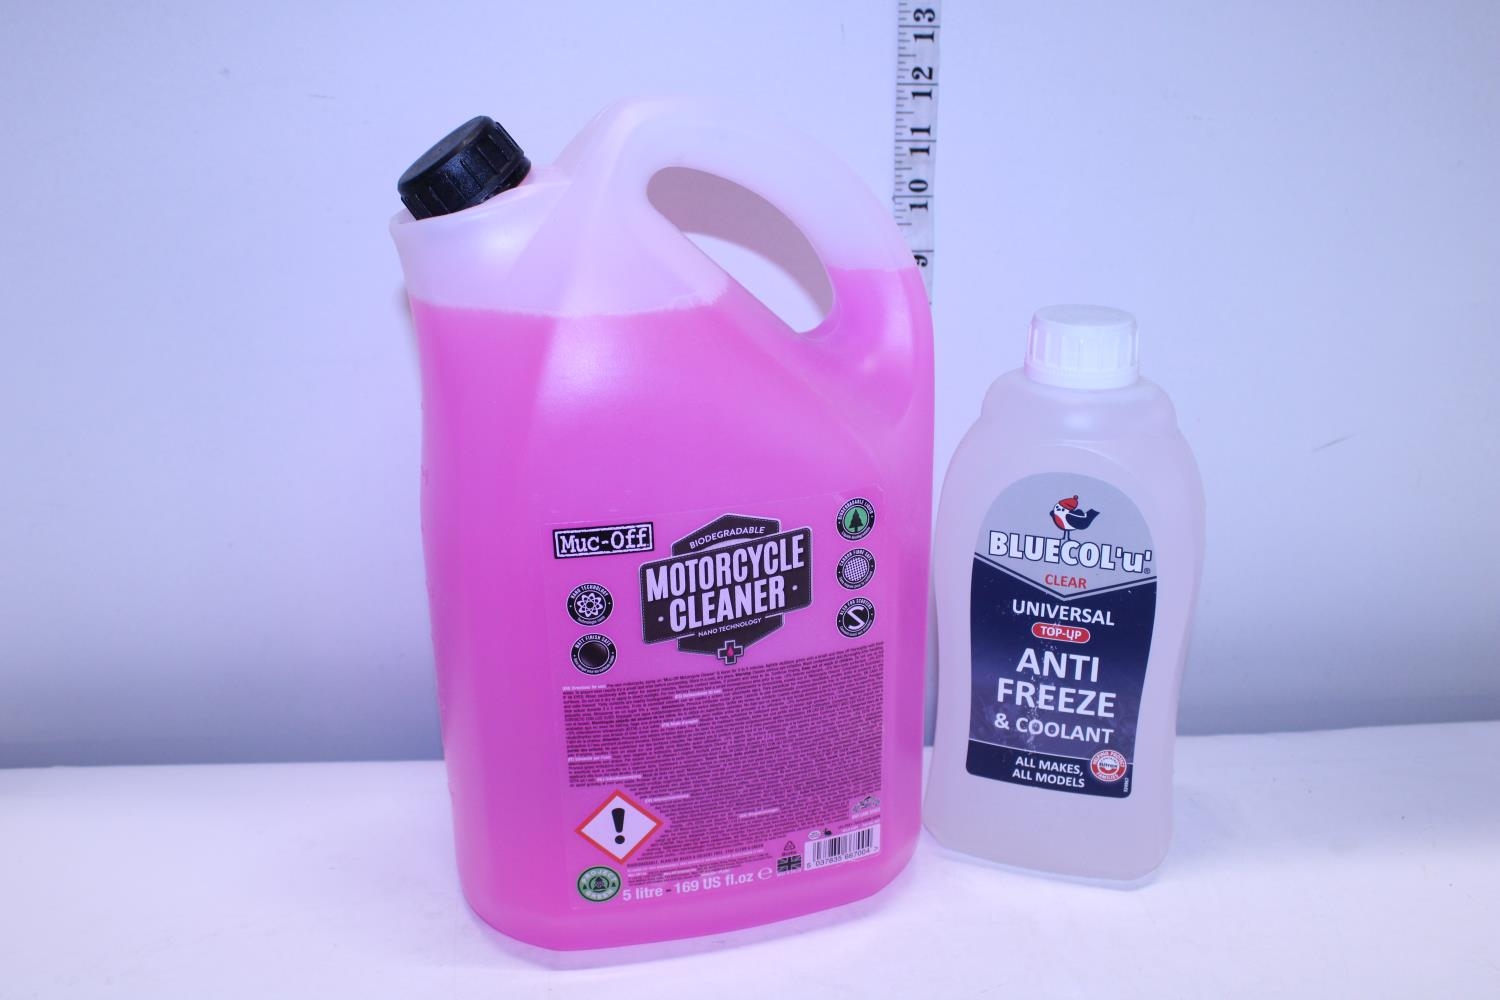 A new sealed bottle of motorcycle cleaner and a bottle of anti-freeze, shipping unavailable